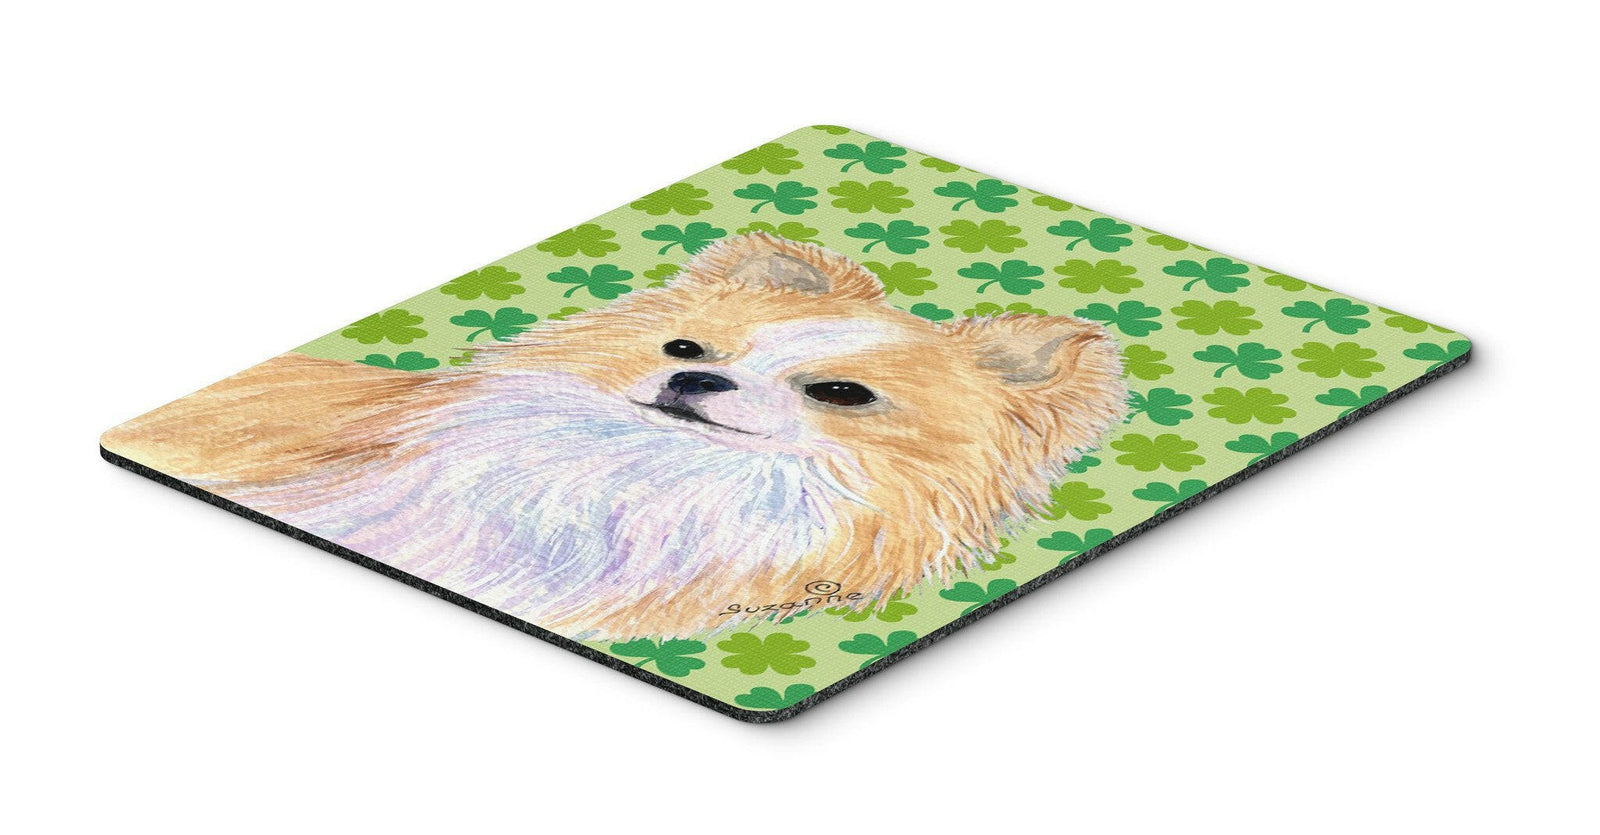 Chihuahua St. Patrick's Day Shamrock Portrait Mouse Pad, Hot Pad or Trivet by Caroline's Treasures